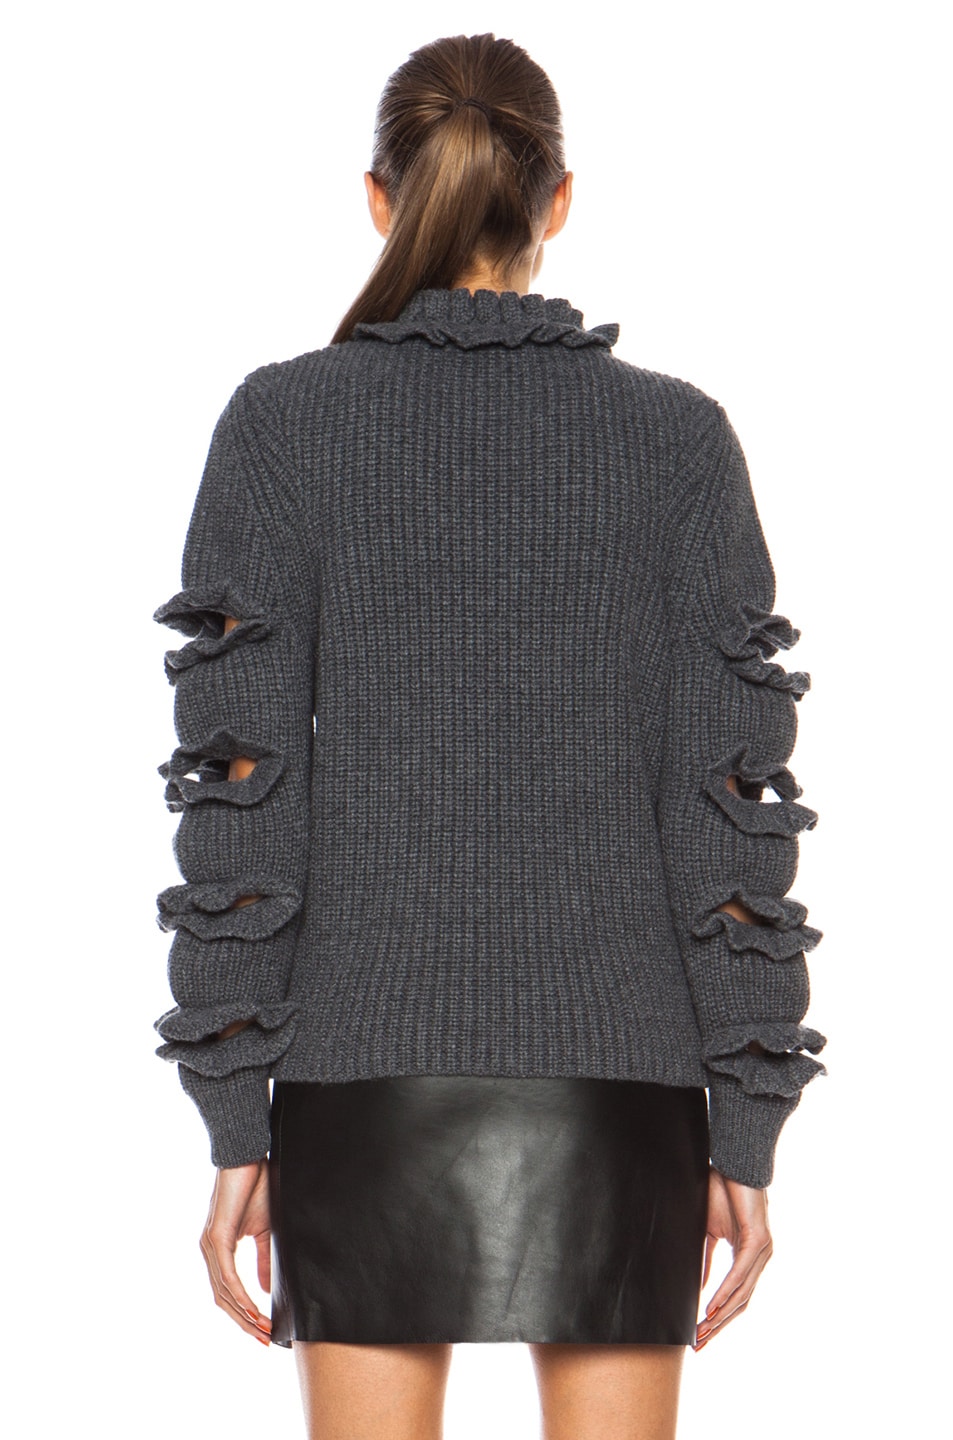 Christopher Kane Frill Chunky Knit Jumper in Grey | FWRD